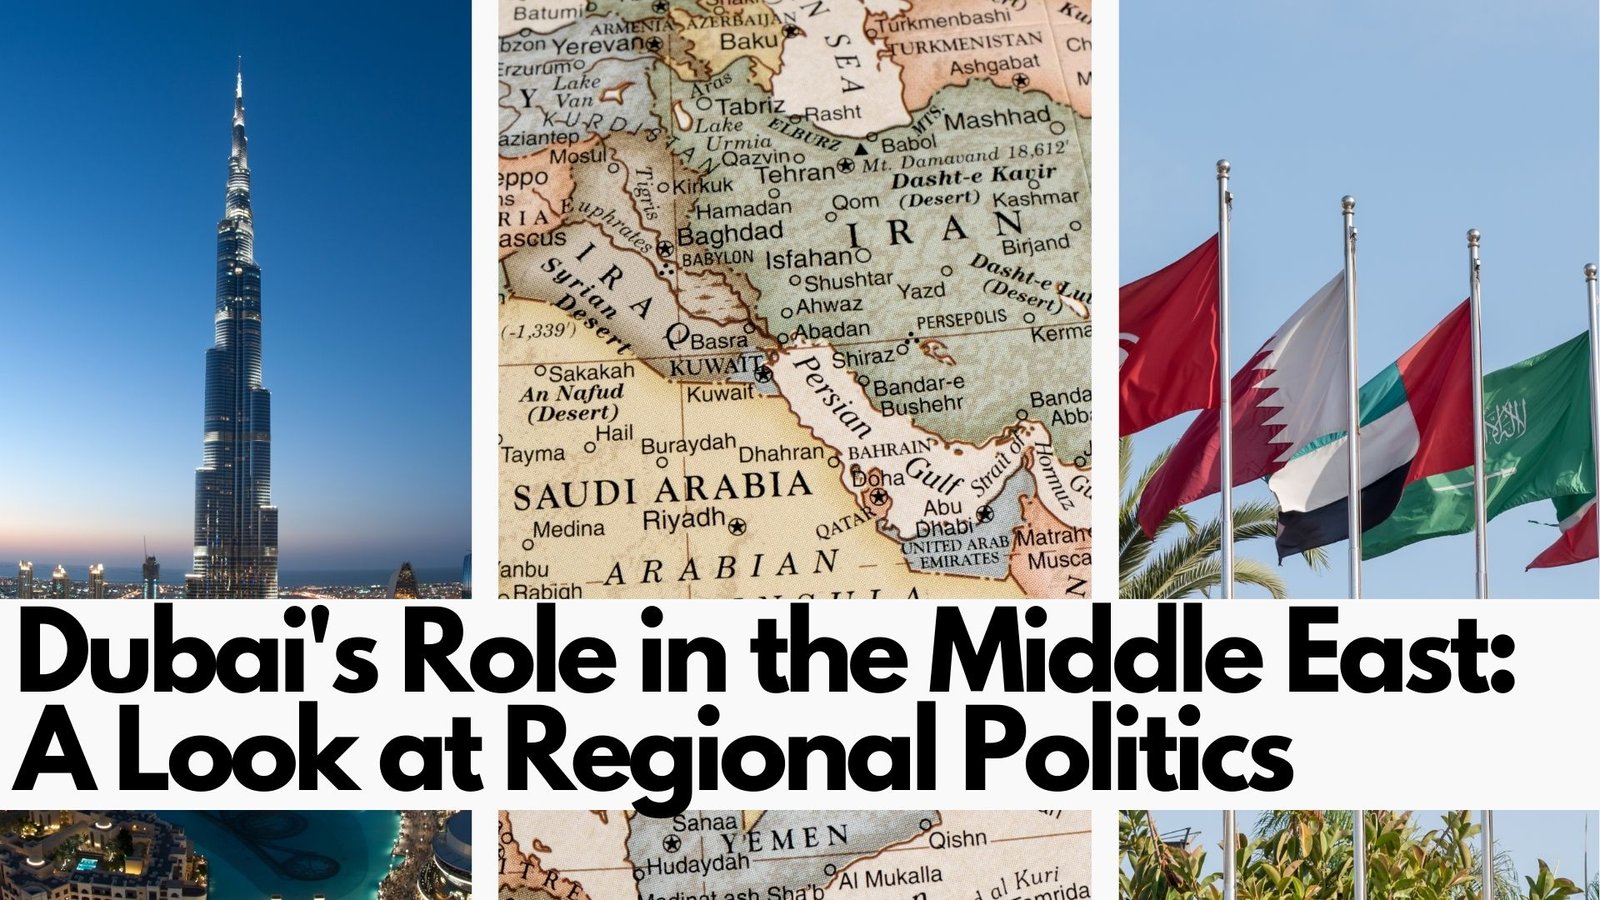 Dubai's Role in the Middle East A Look at Regional Politics